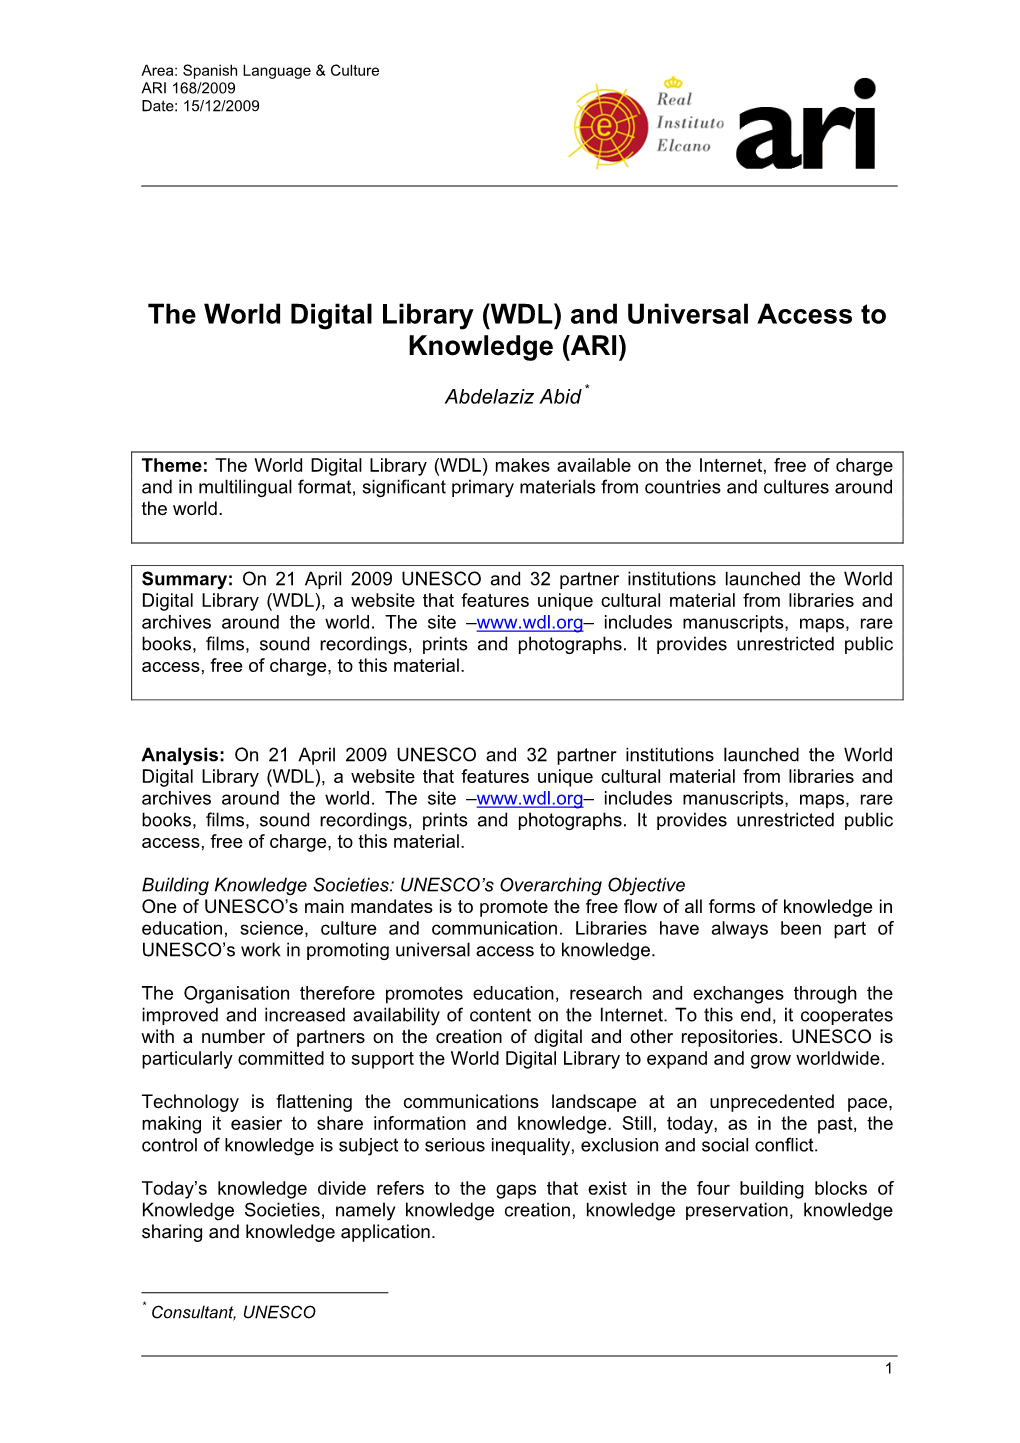 The World Digital Library (WDL) and Universal Access to Knowledge (ARI)